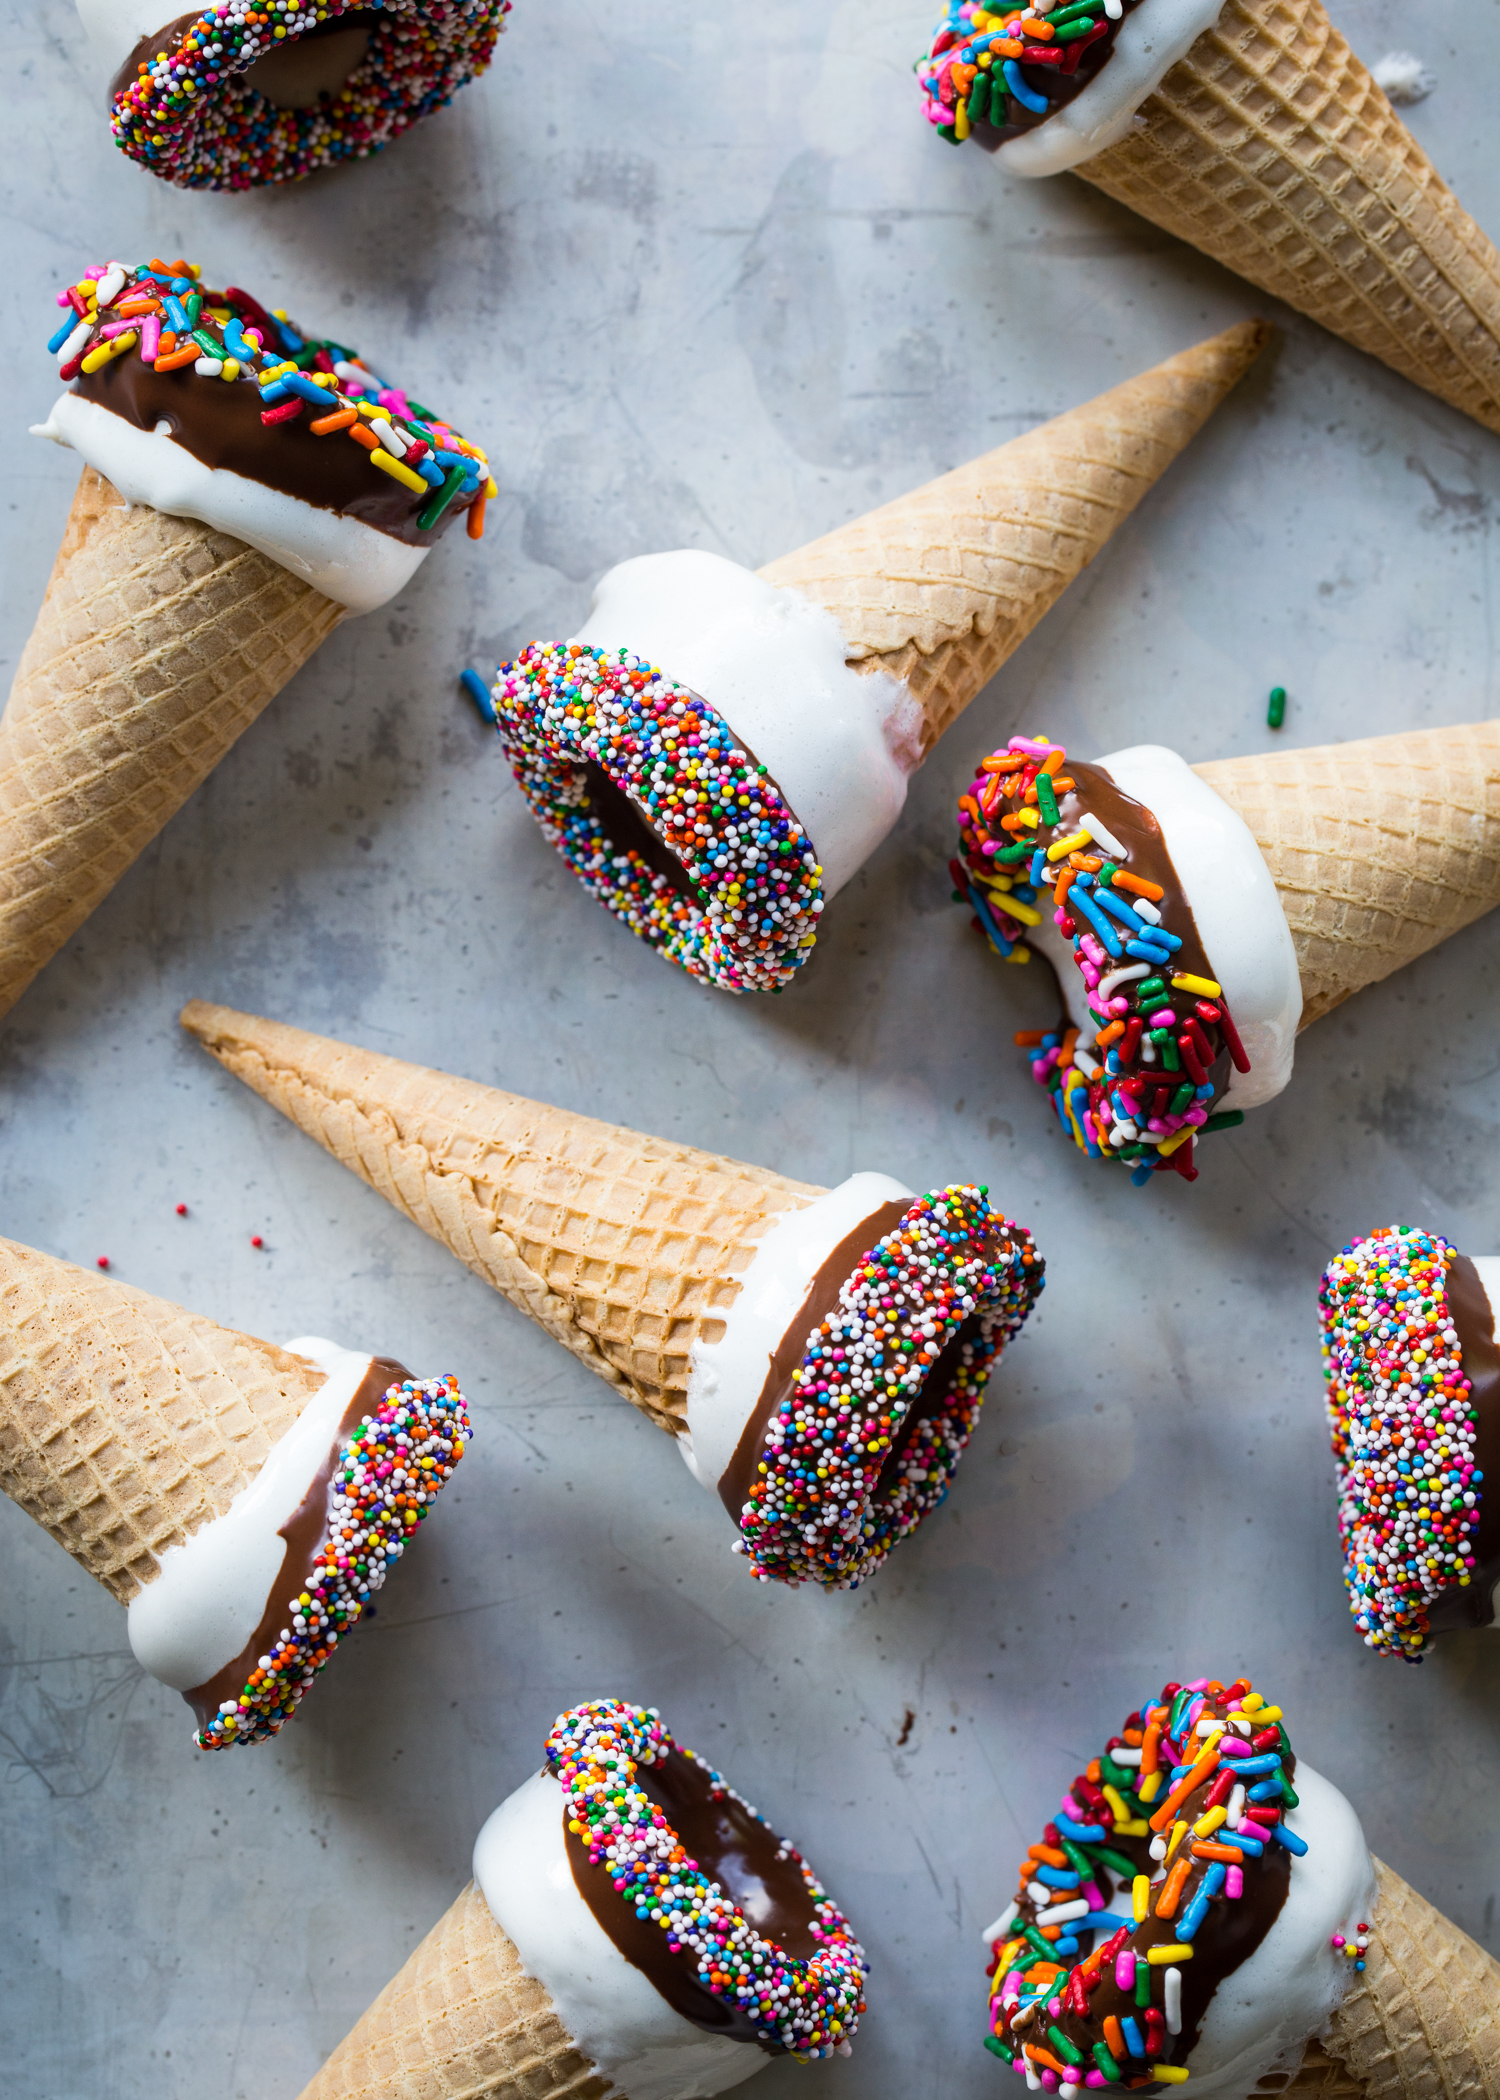 marshmallow dipped ice cream cones are simple and fun to make!